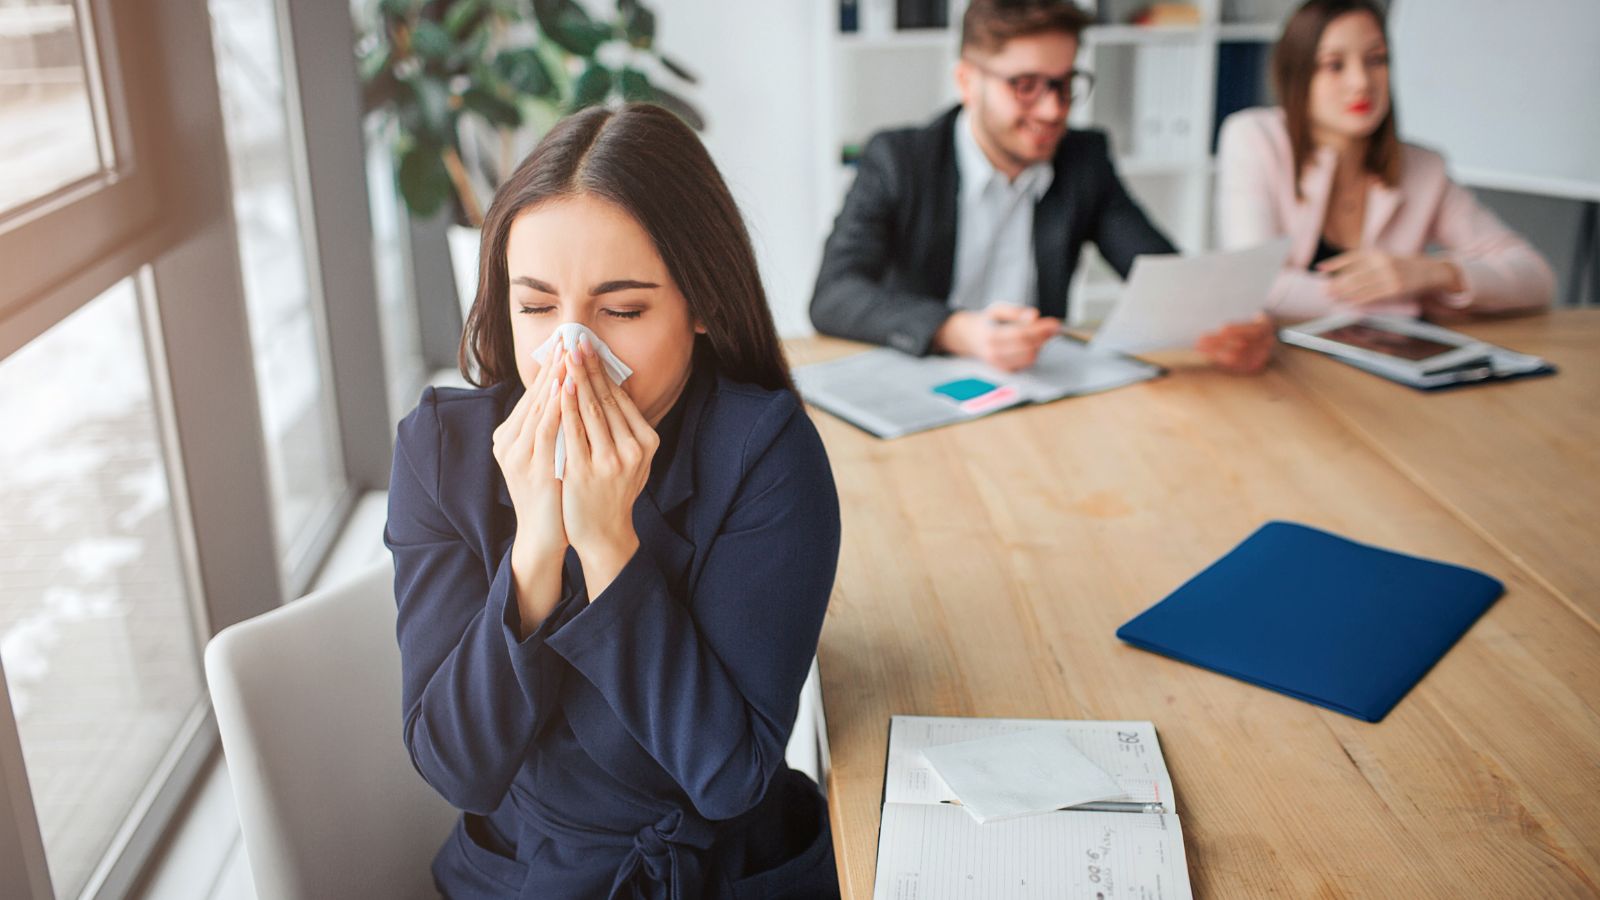 <p>In 2023, some 30% of white-collar workers with paid leave took sick days, up from about 20% in 2019, according to a report from HR software company <a href="https://gusto.com/company-news/younger-workers-leading-the-charge-on-taking-sick-leave-post-pandemic">Gusto</a>. Those aged 25 to 34 are taking their sick days most often. "The younger generation is now the most likely to take time away from work to rest and recover from an illness-a sign of a generational shift in the attitude that employees have to take time off to protect their health."</p>